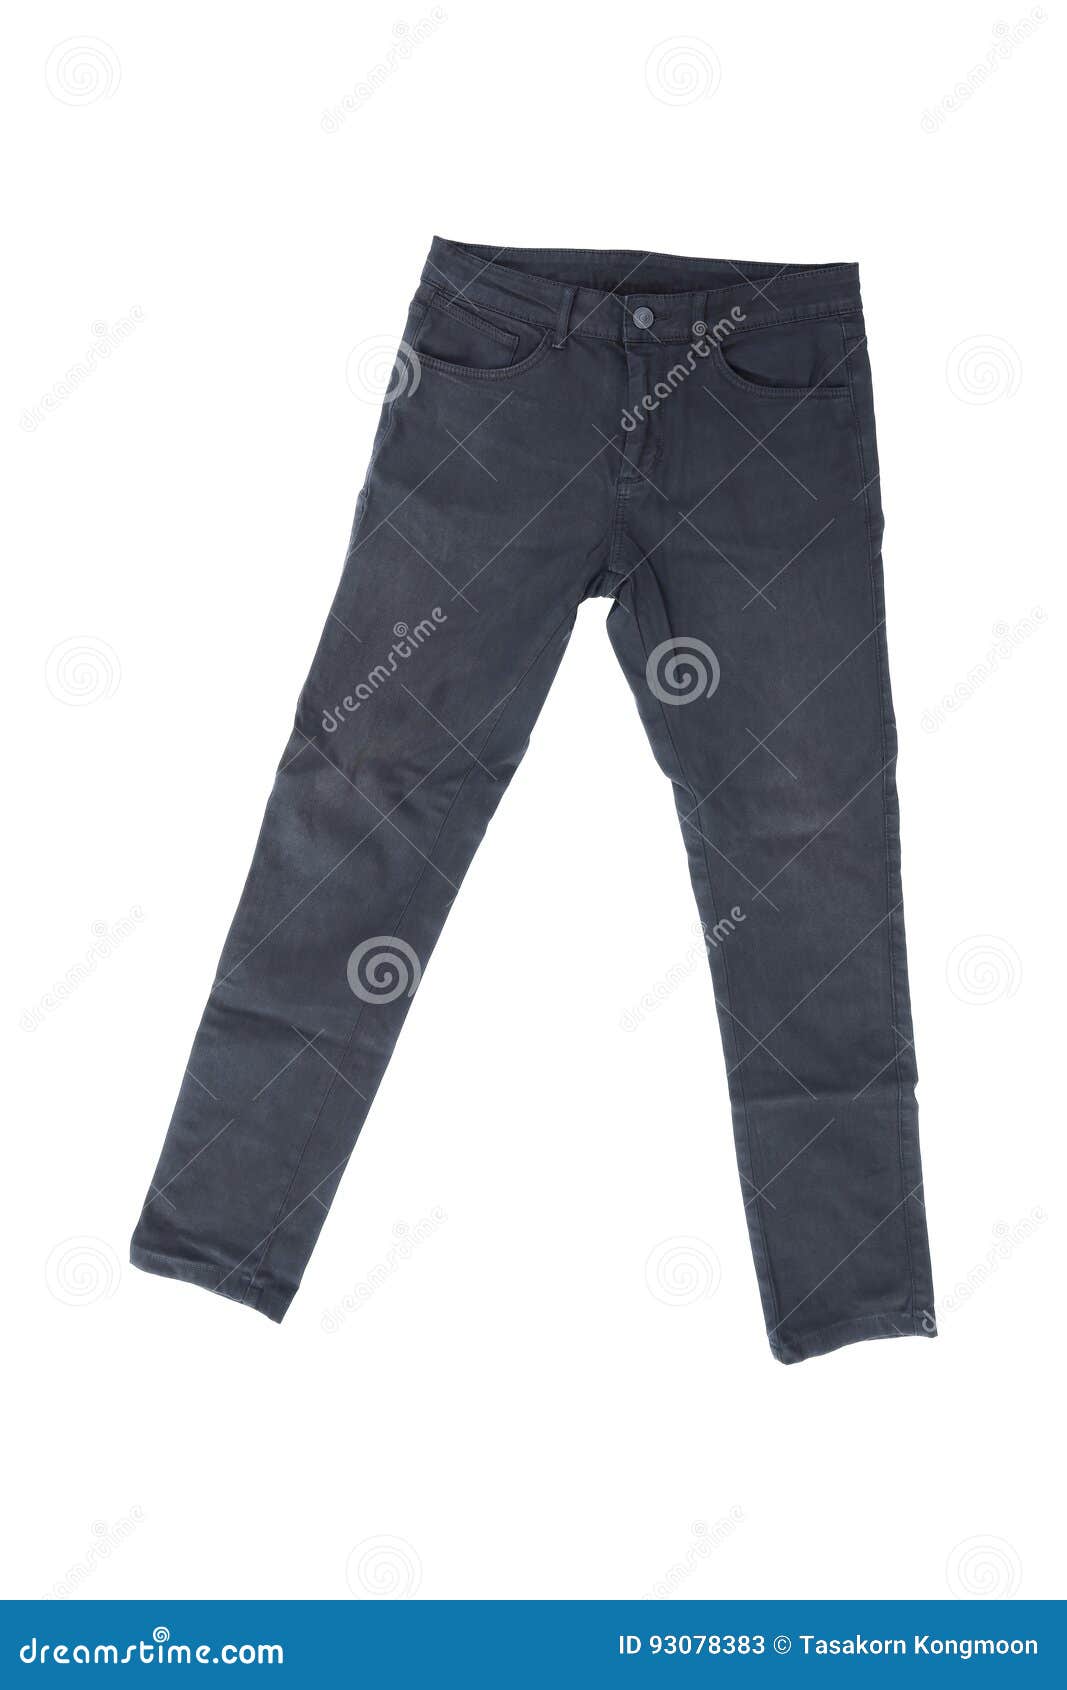 Black Jeans Isolated on White Stock Image - Image of label, pattern ...